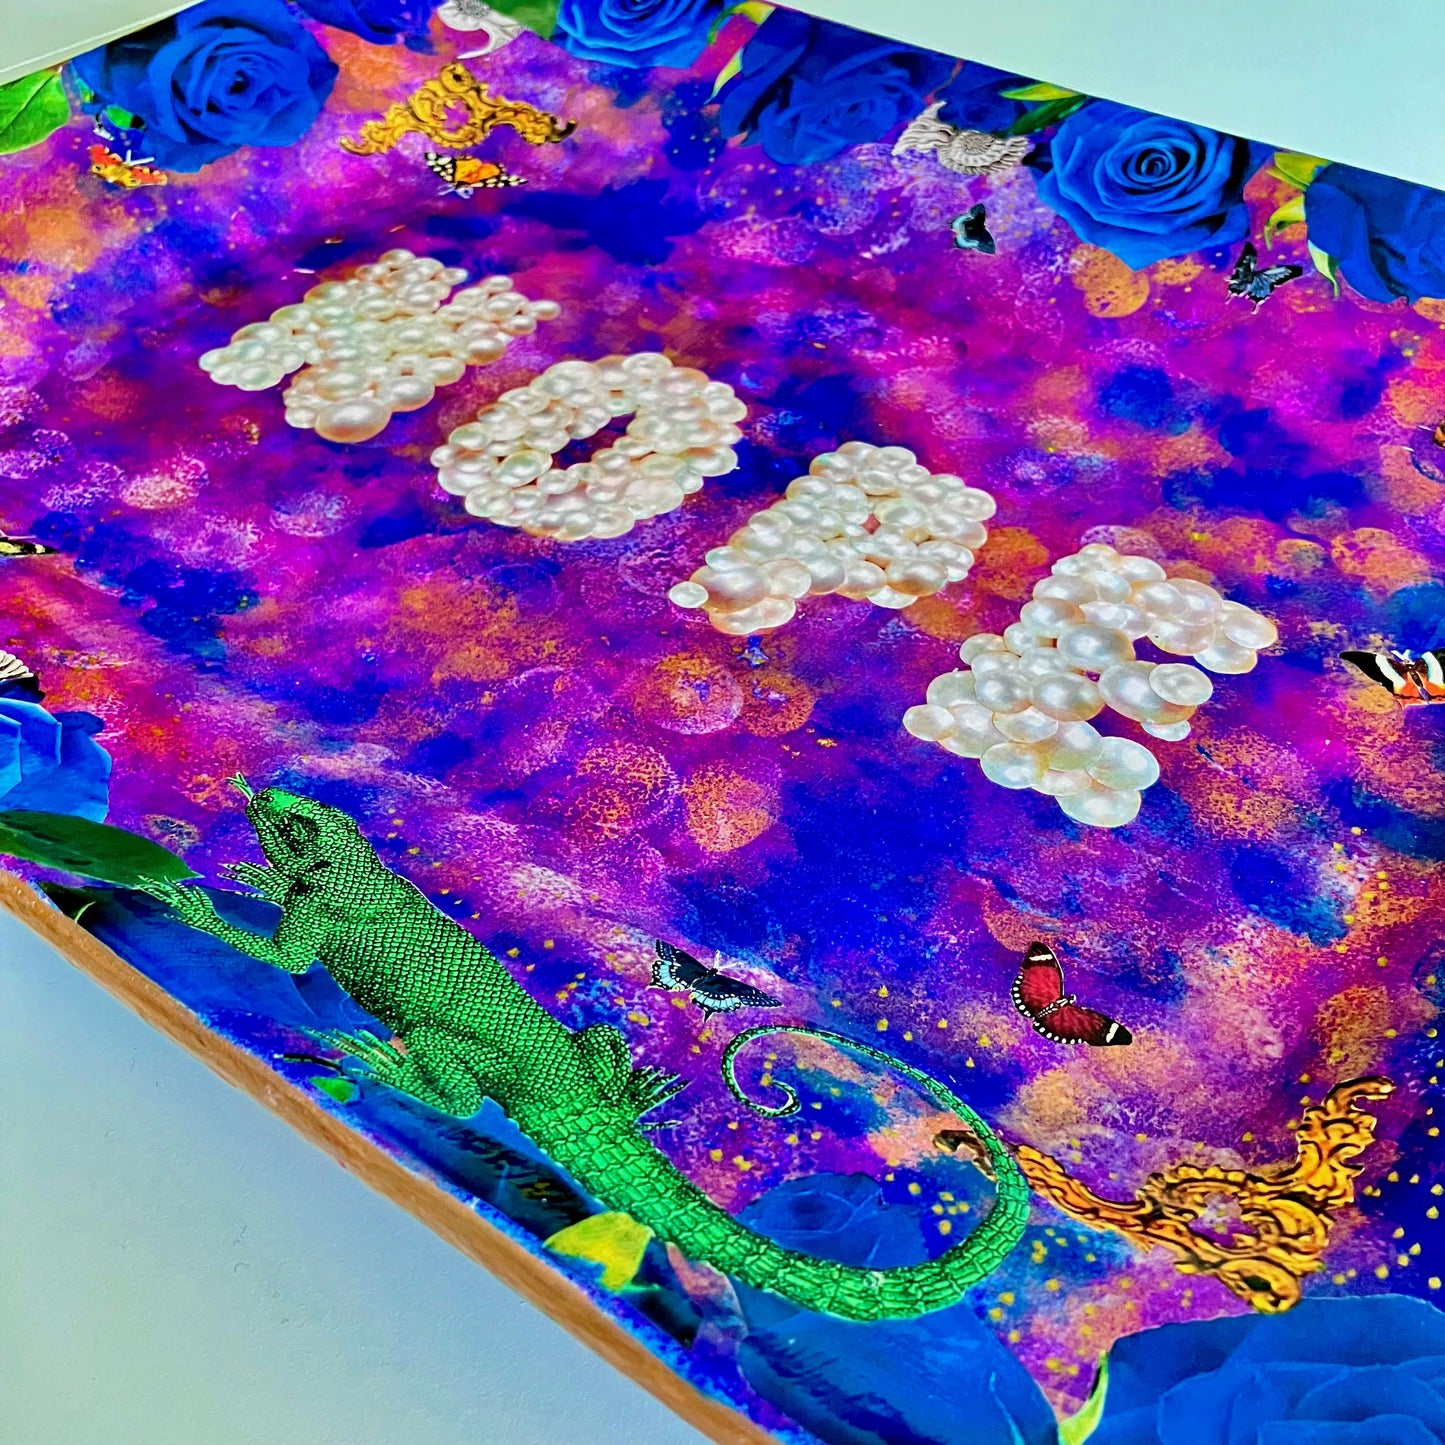 "Nope" Wall Plate by House of Frisson. Featuring the word "nope" written with pearls, framed by blue roses, shells, moths, and a lizard, on a  purple, blue and golden background. Closeup details showing blue roses, moths, and a lizard.